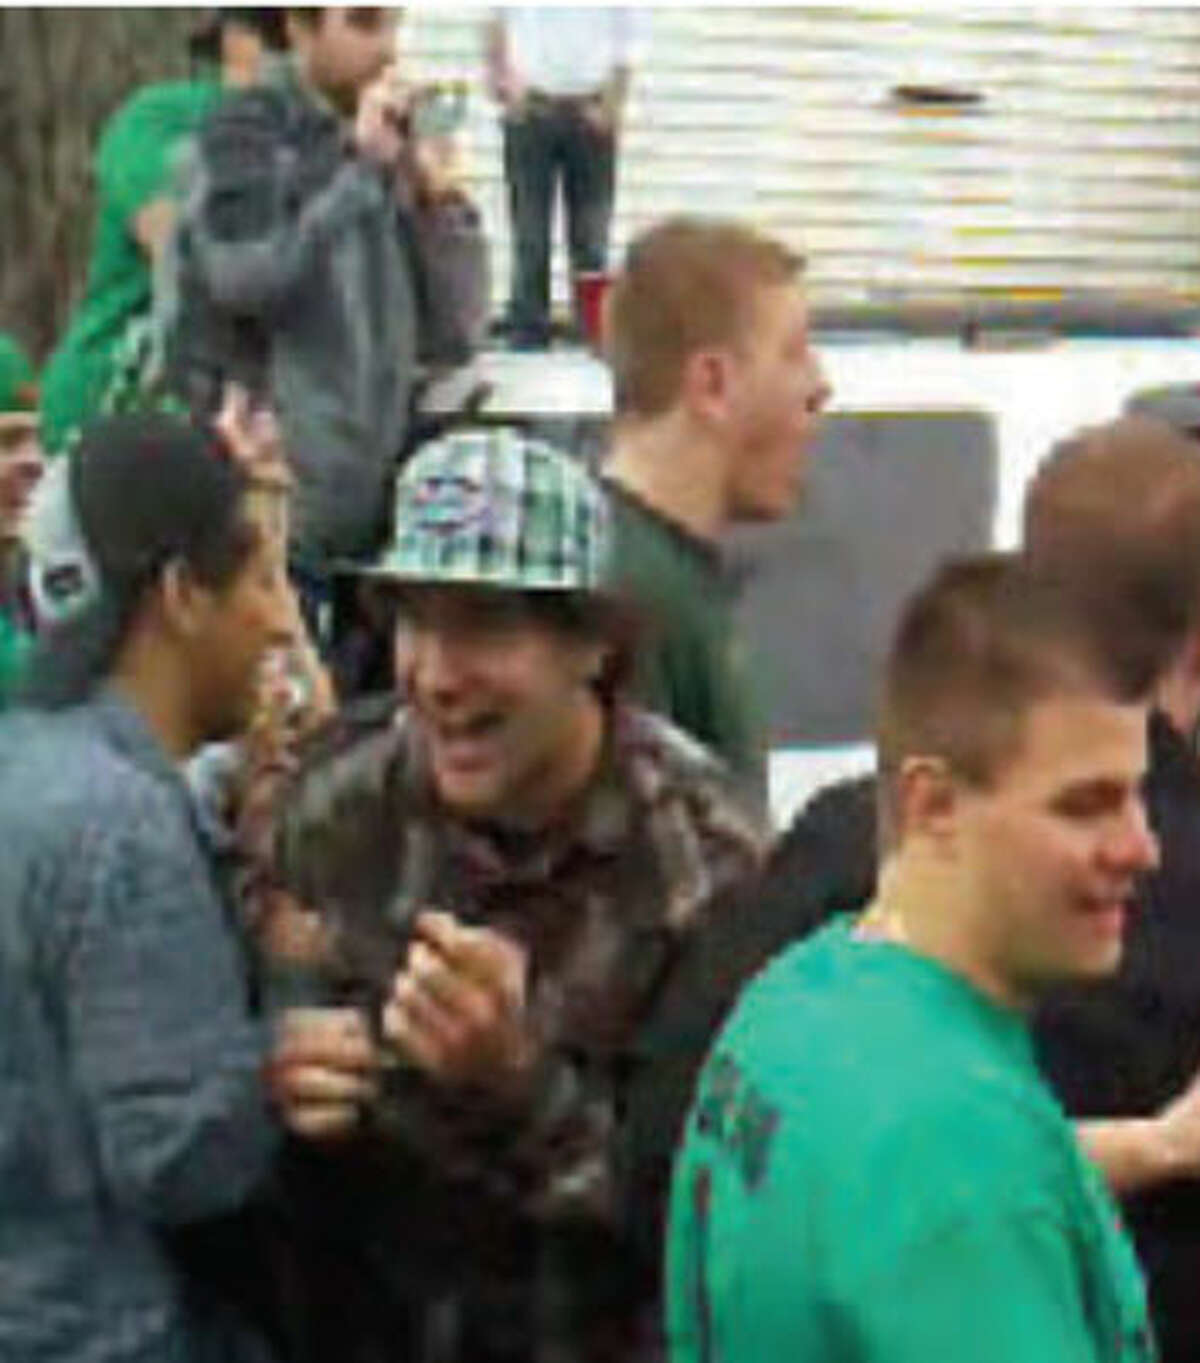 Video still from March 12, 2011 kegs and eggs riot.